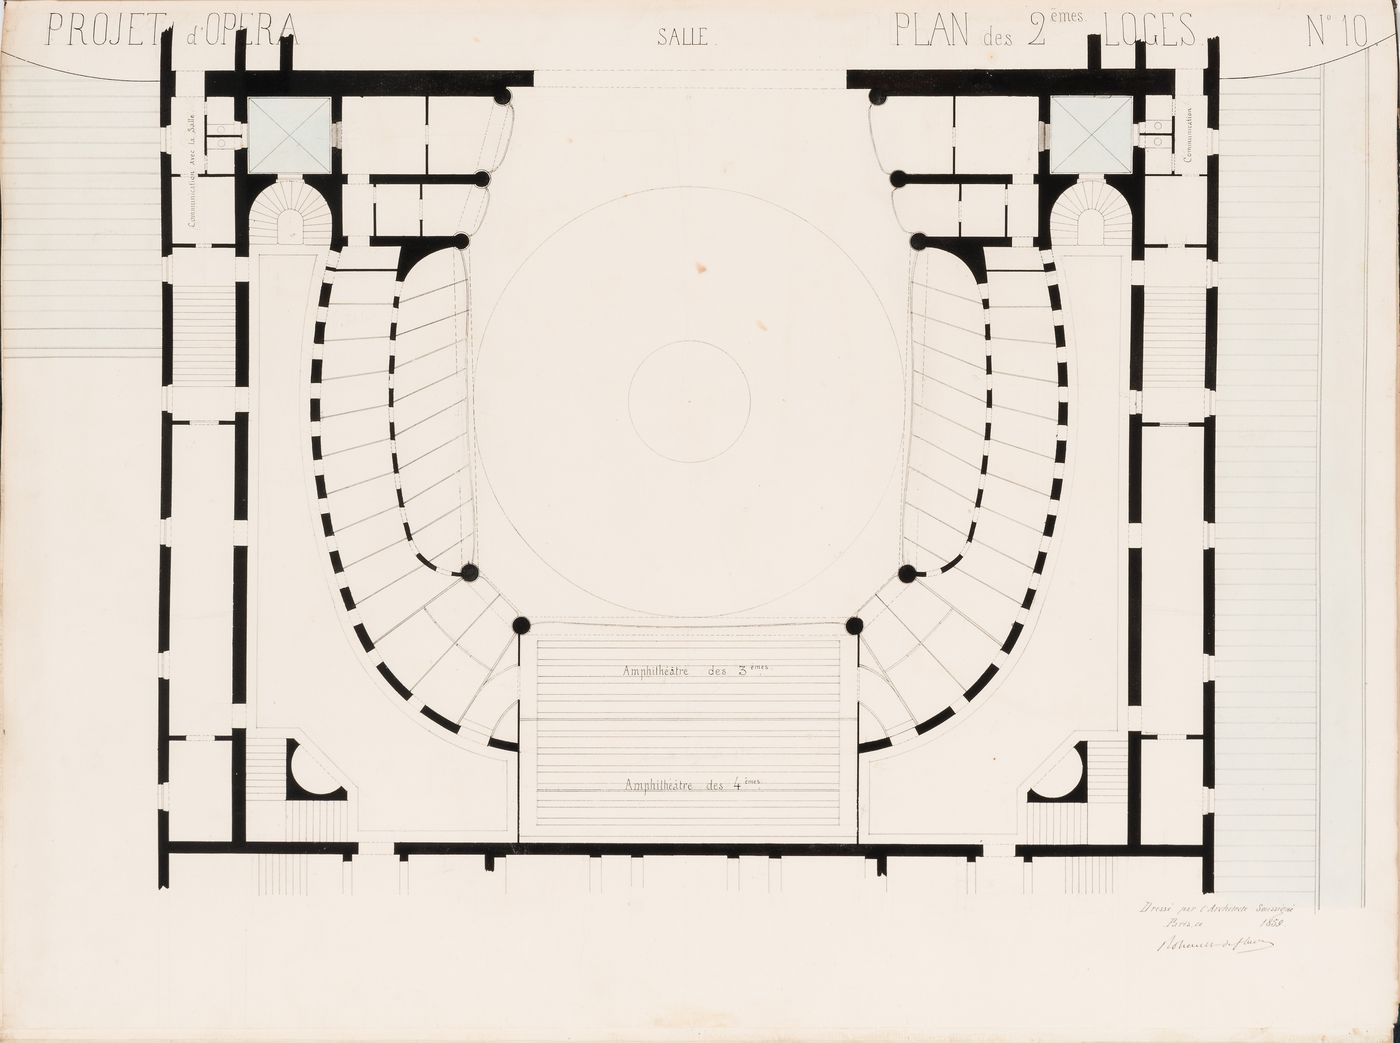 Project for an opera house for the Théâtre impérial de l'opéra: Plan for the "2e loges"